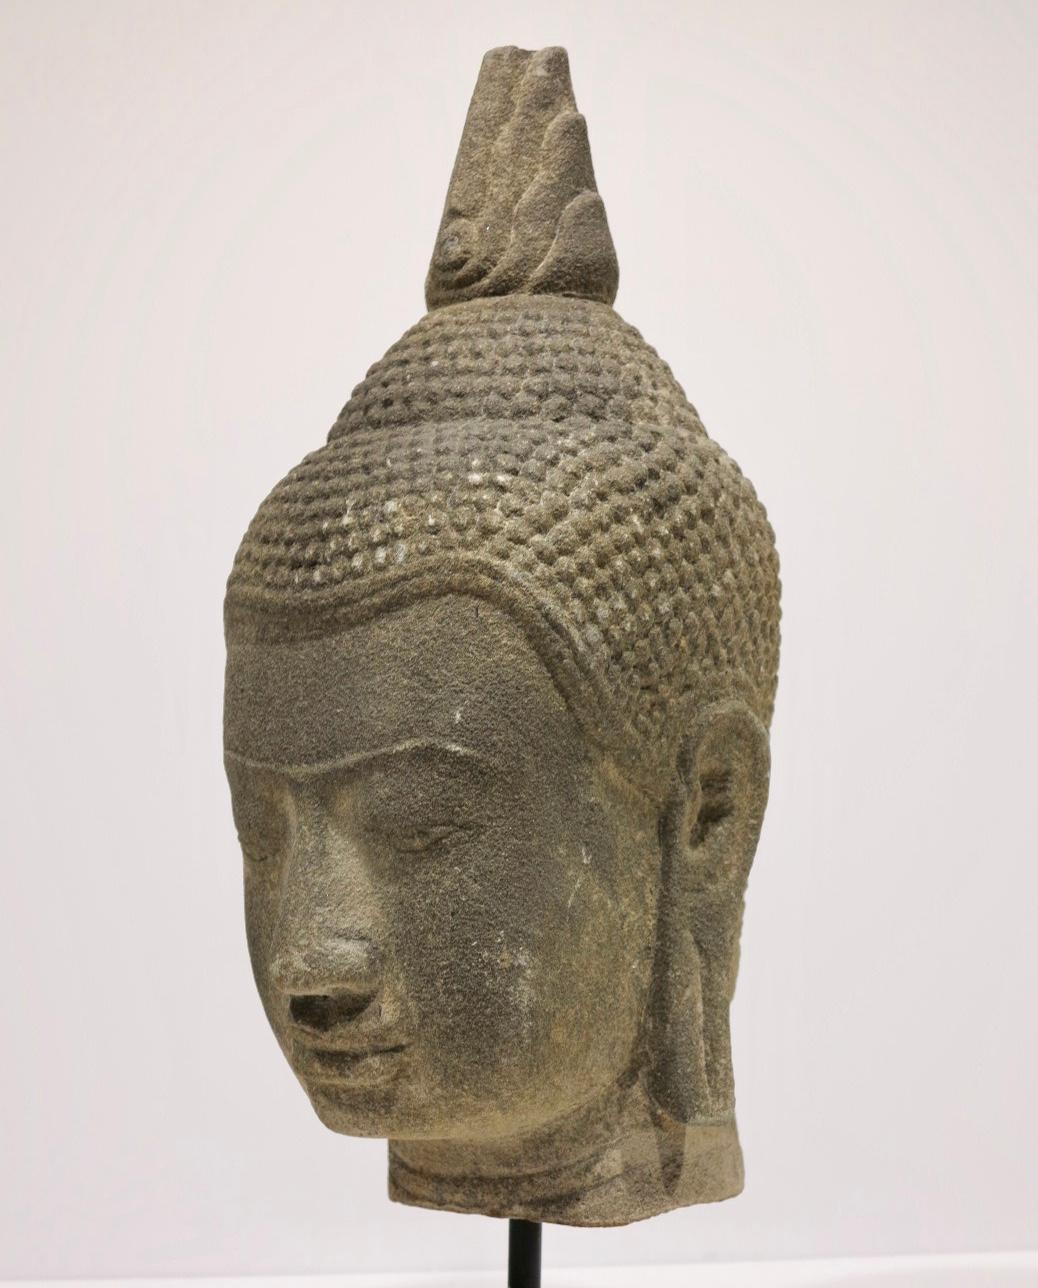 Sandstone head of Buddha, Khmer, Angkor period, post-Bayon - Gray Figurative Sculpture by Unknown